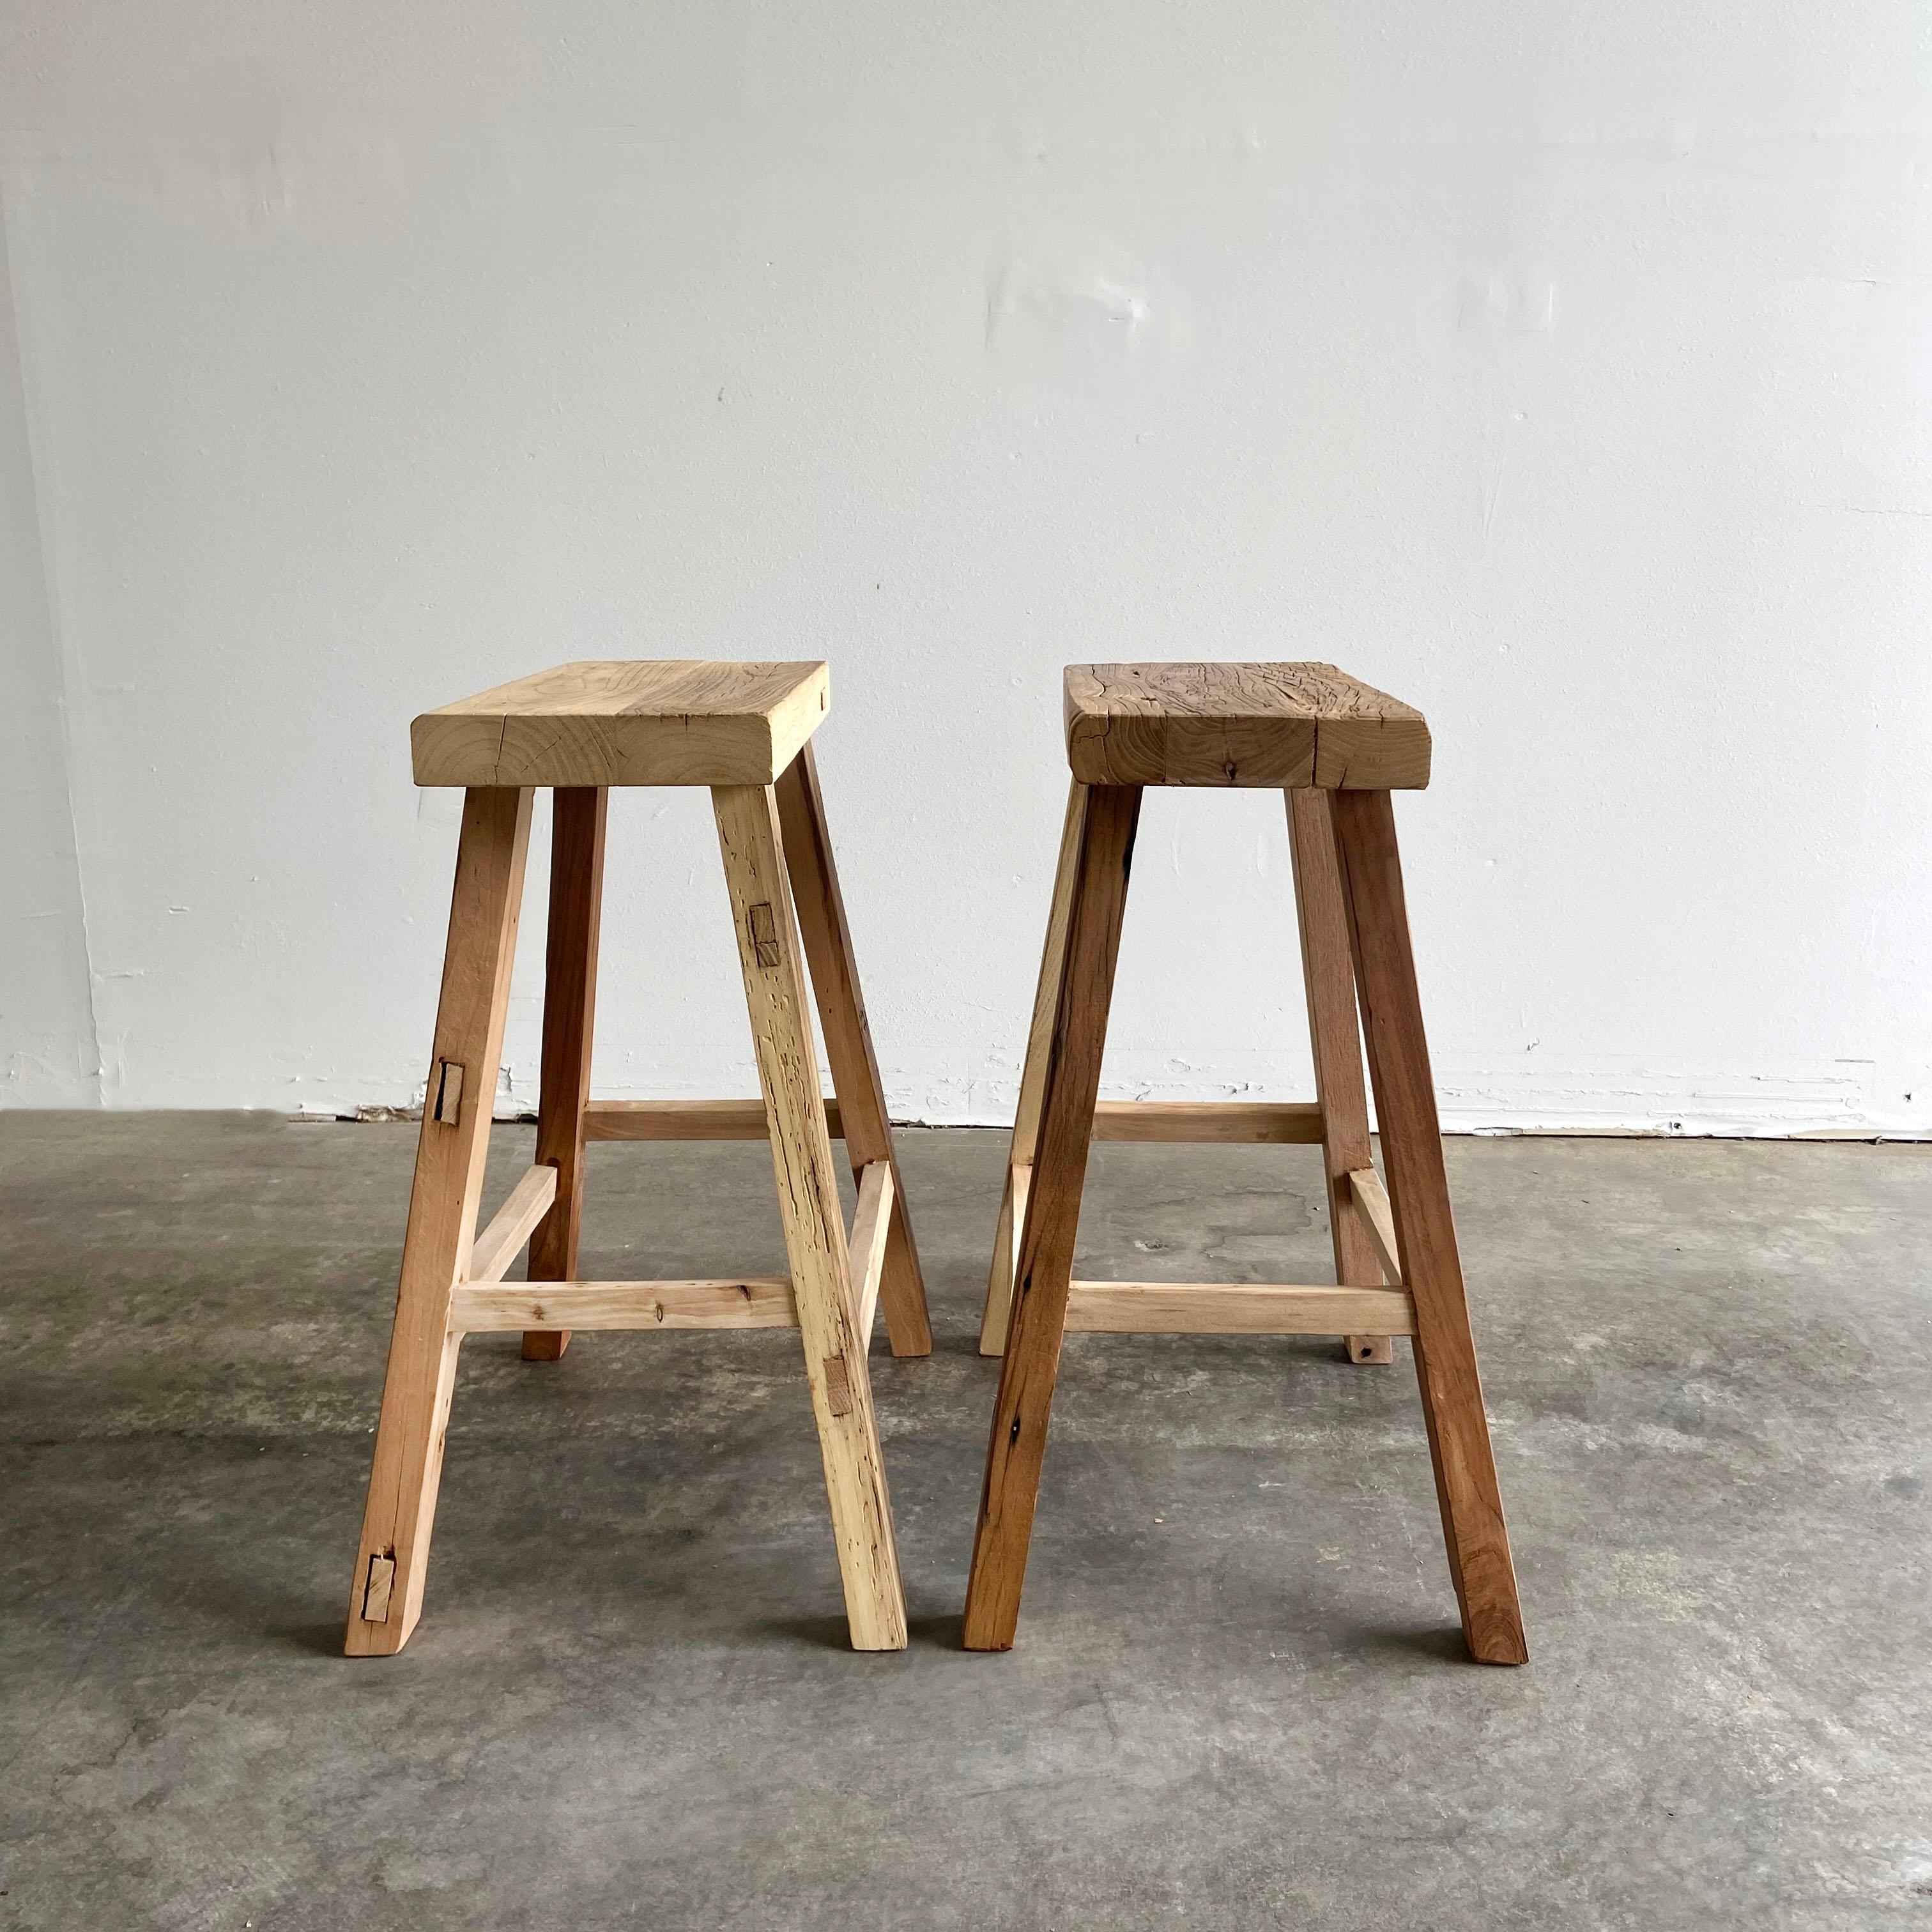 Vintage antique elm wood stool or pedestal
These are reclaimed elm wood stools! Beautiful antique patina, with weathering and age, these are solid and sturdy ready for daily use, use as a table, stool, drink table, they are great for any space.